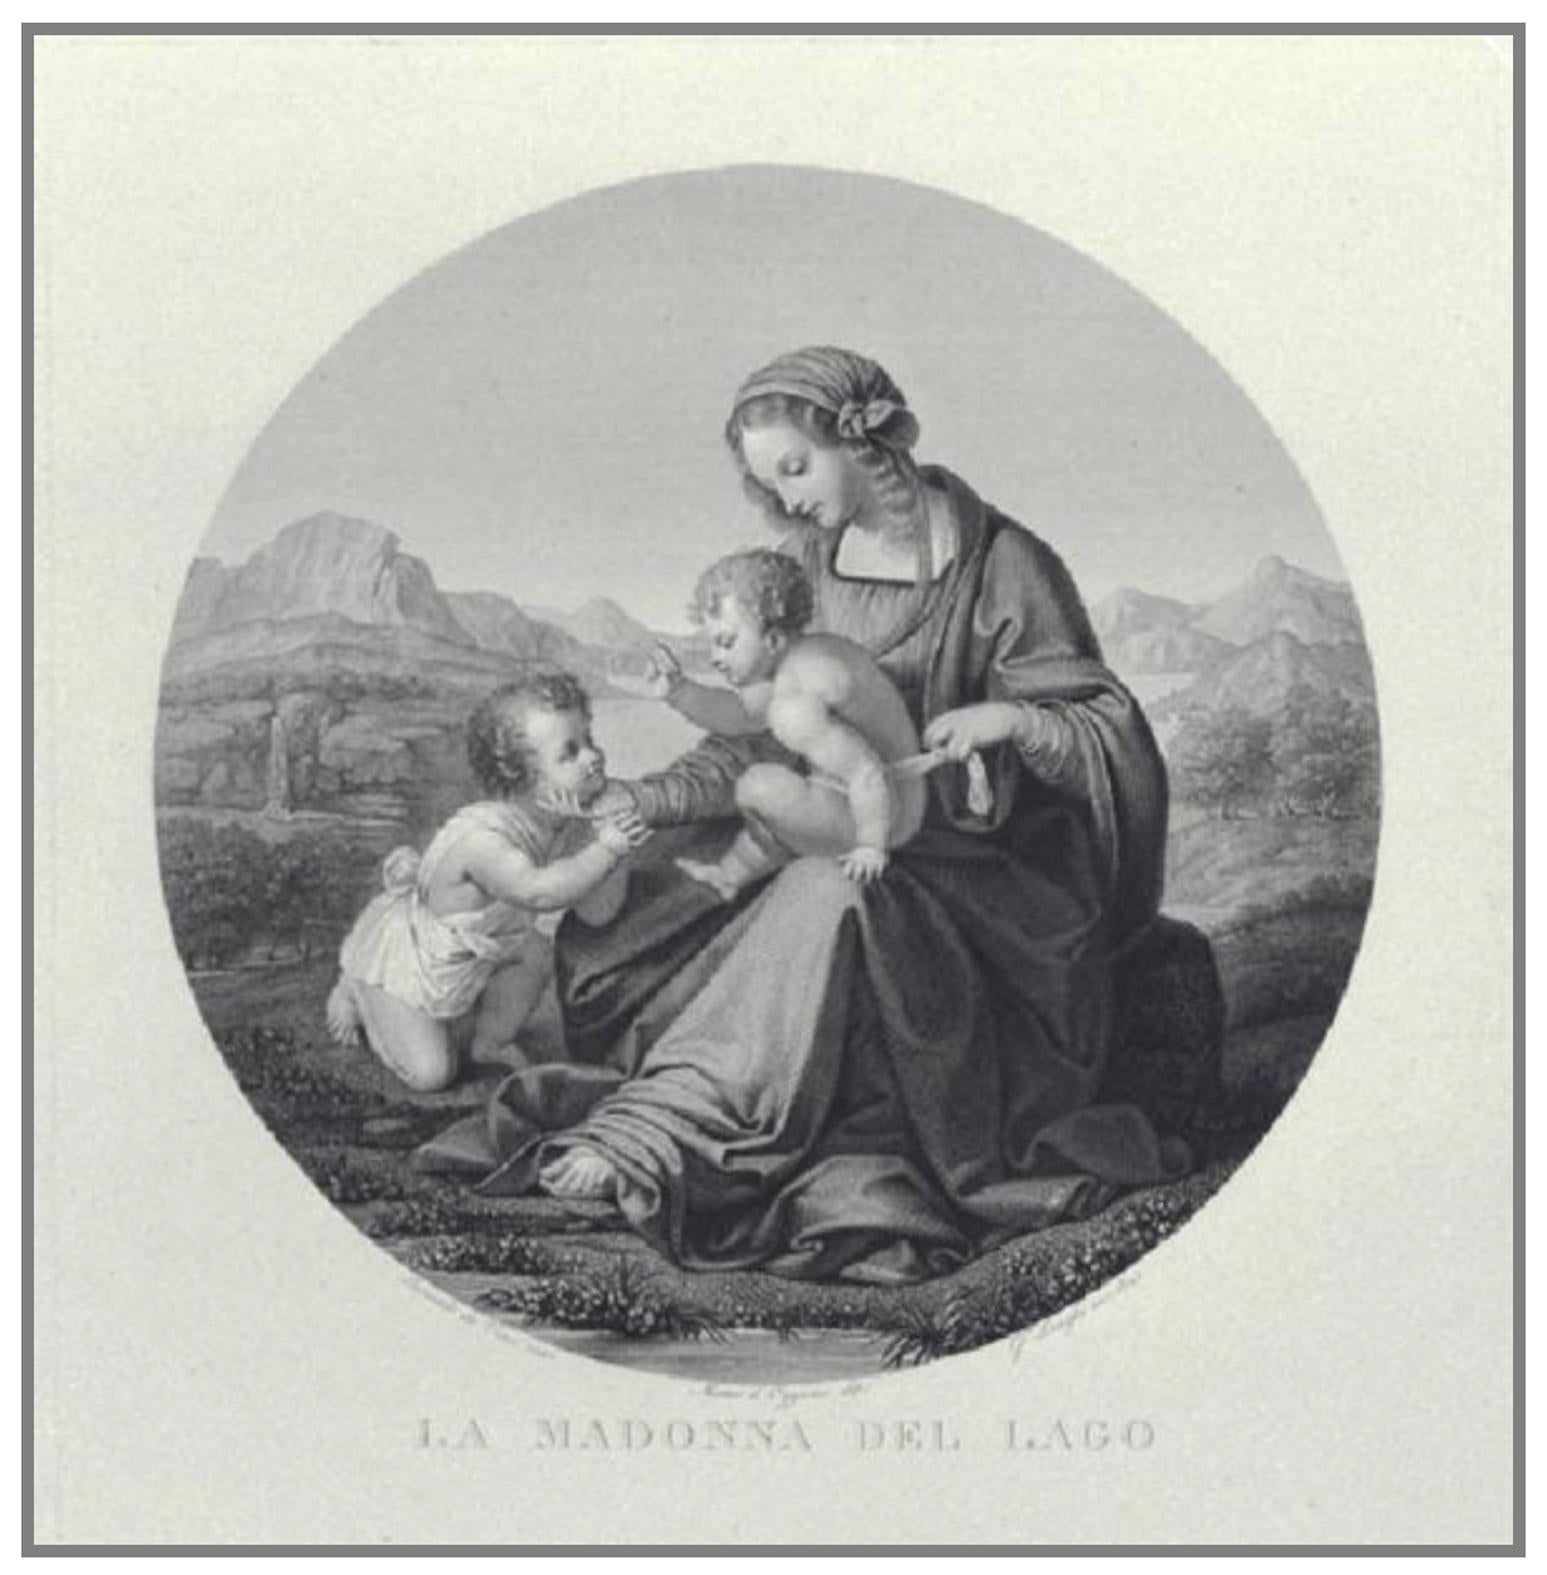 Embossed and engraved silver plaque
La Madonna del lago (The Madonna of the Lake)
Probably Milan, post 1824
Brass frame
It measures 16.14 in x 13.85 in (41 x 35.2 cm) and it weighs 10.357 pounds (4.698 g): silver 1.31 pounds (598 g) + brass 9.03